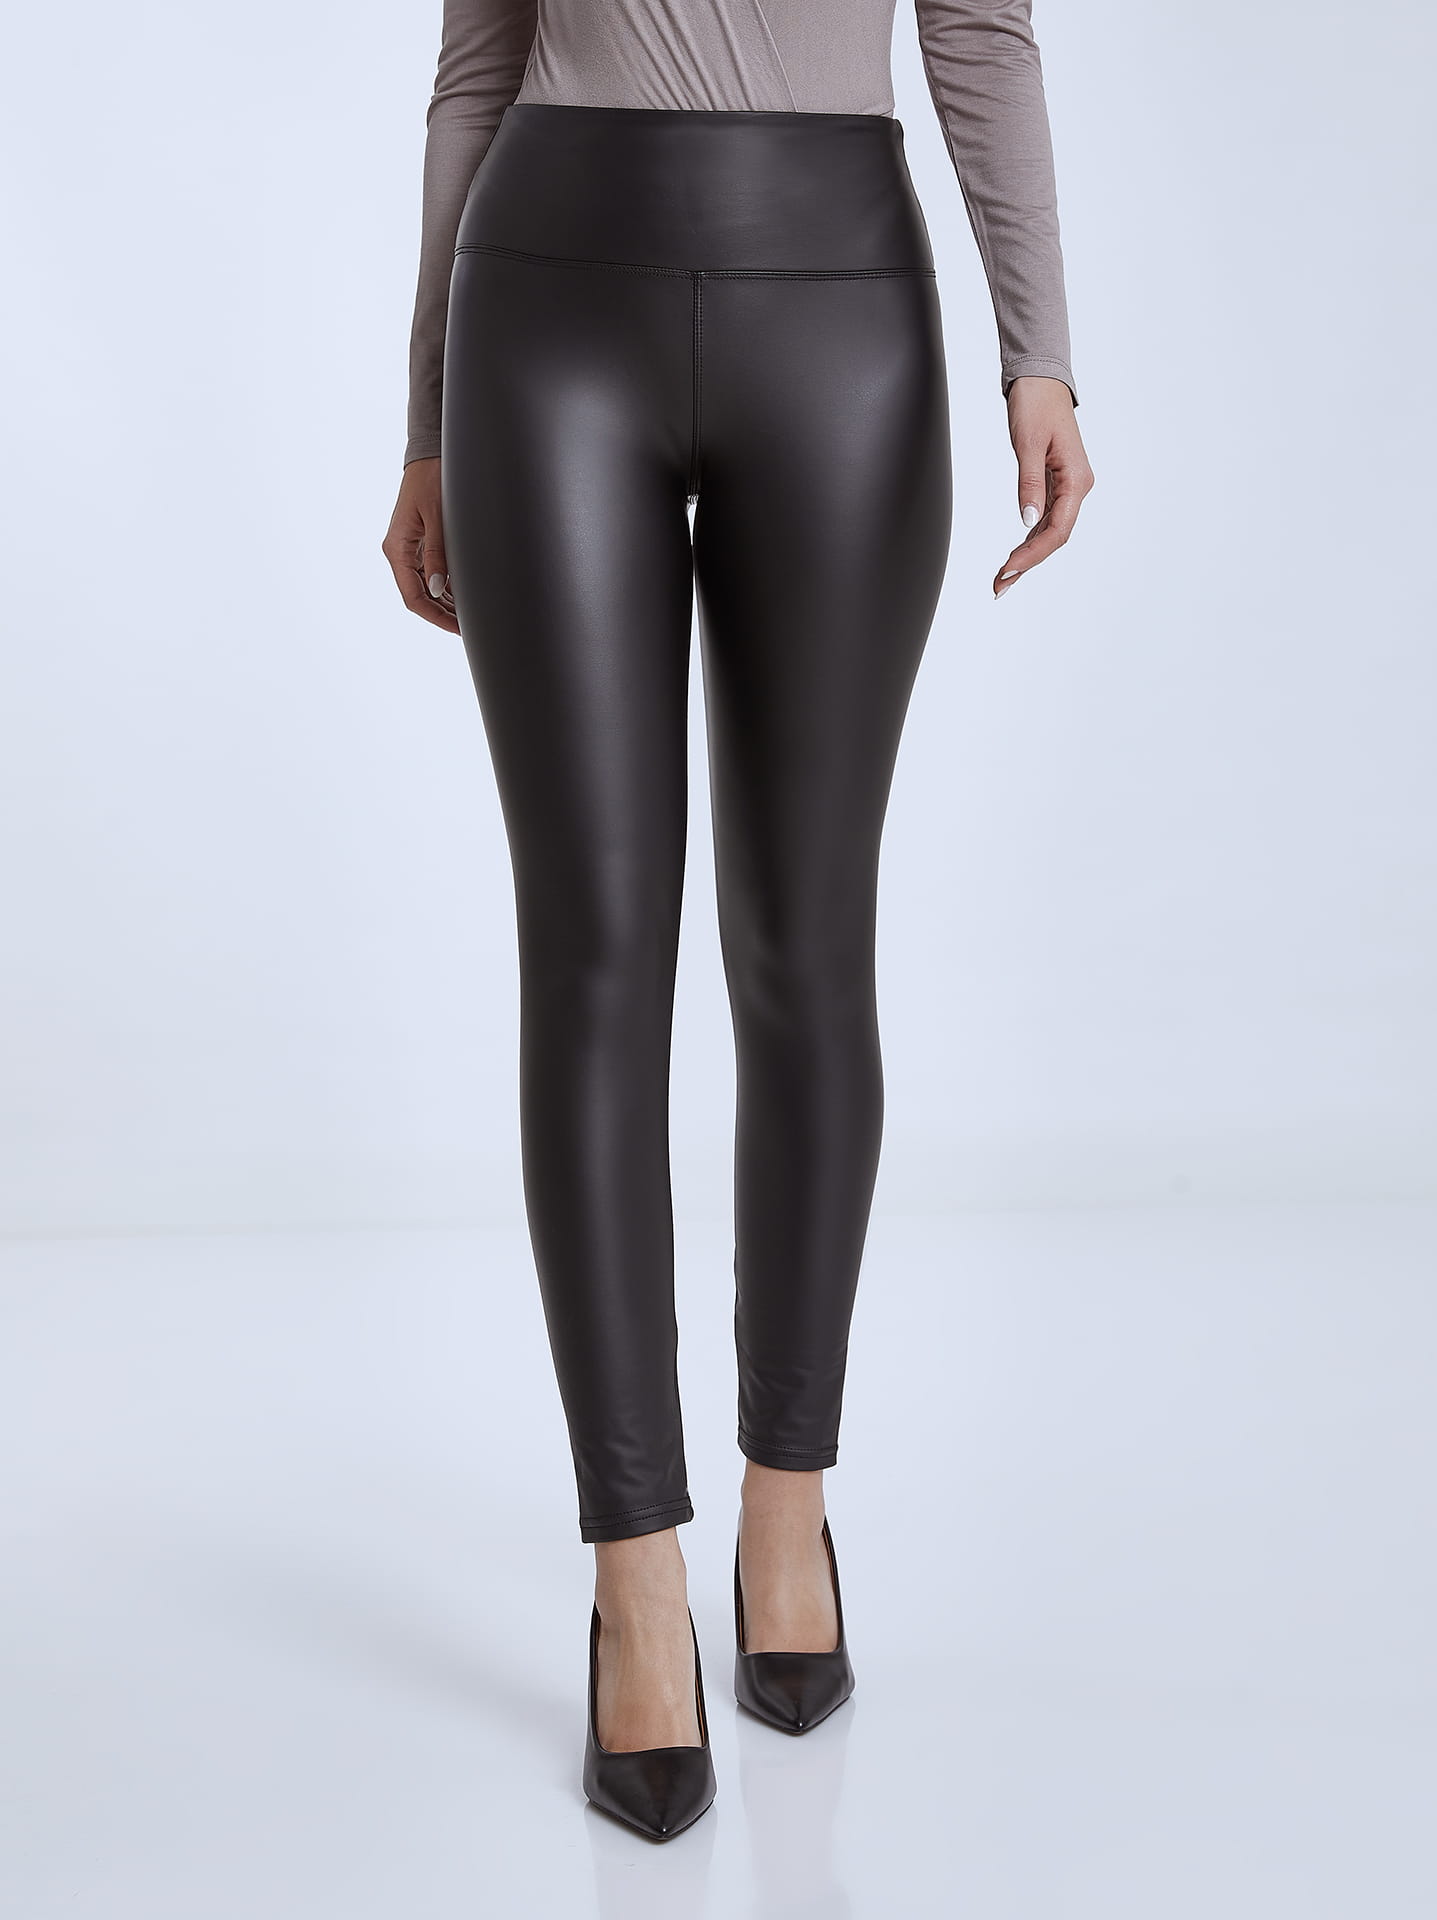 Leather effect leggings with elastic waistband in black, 9.99